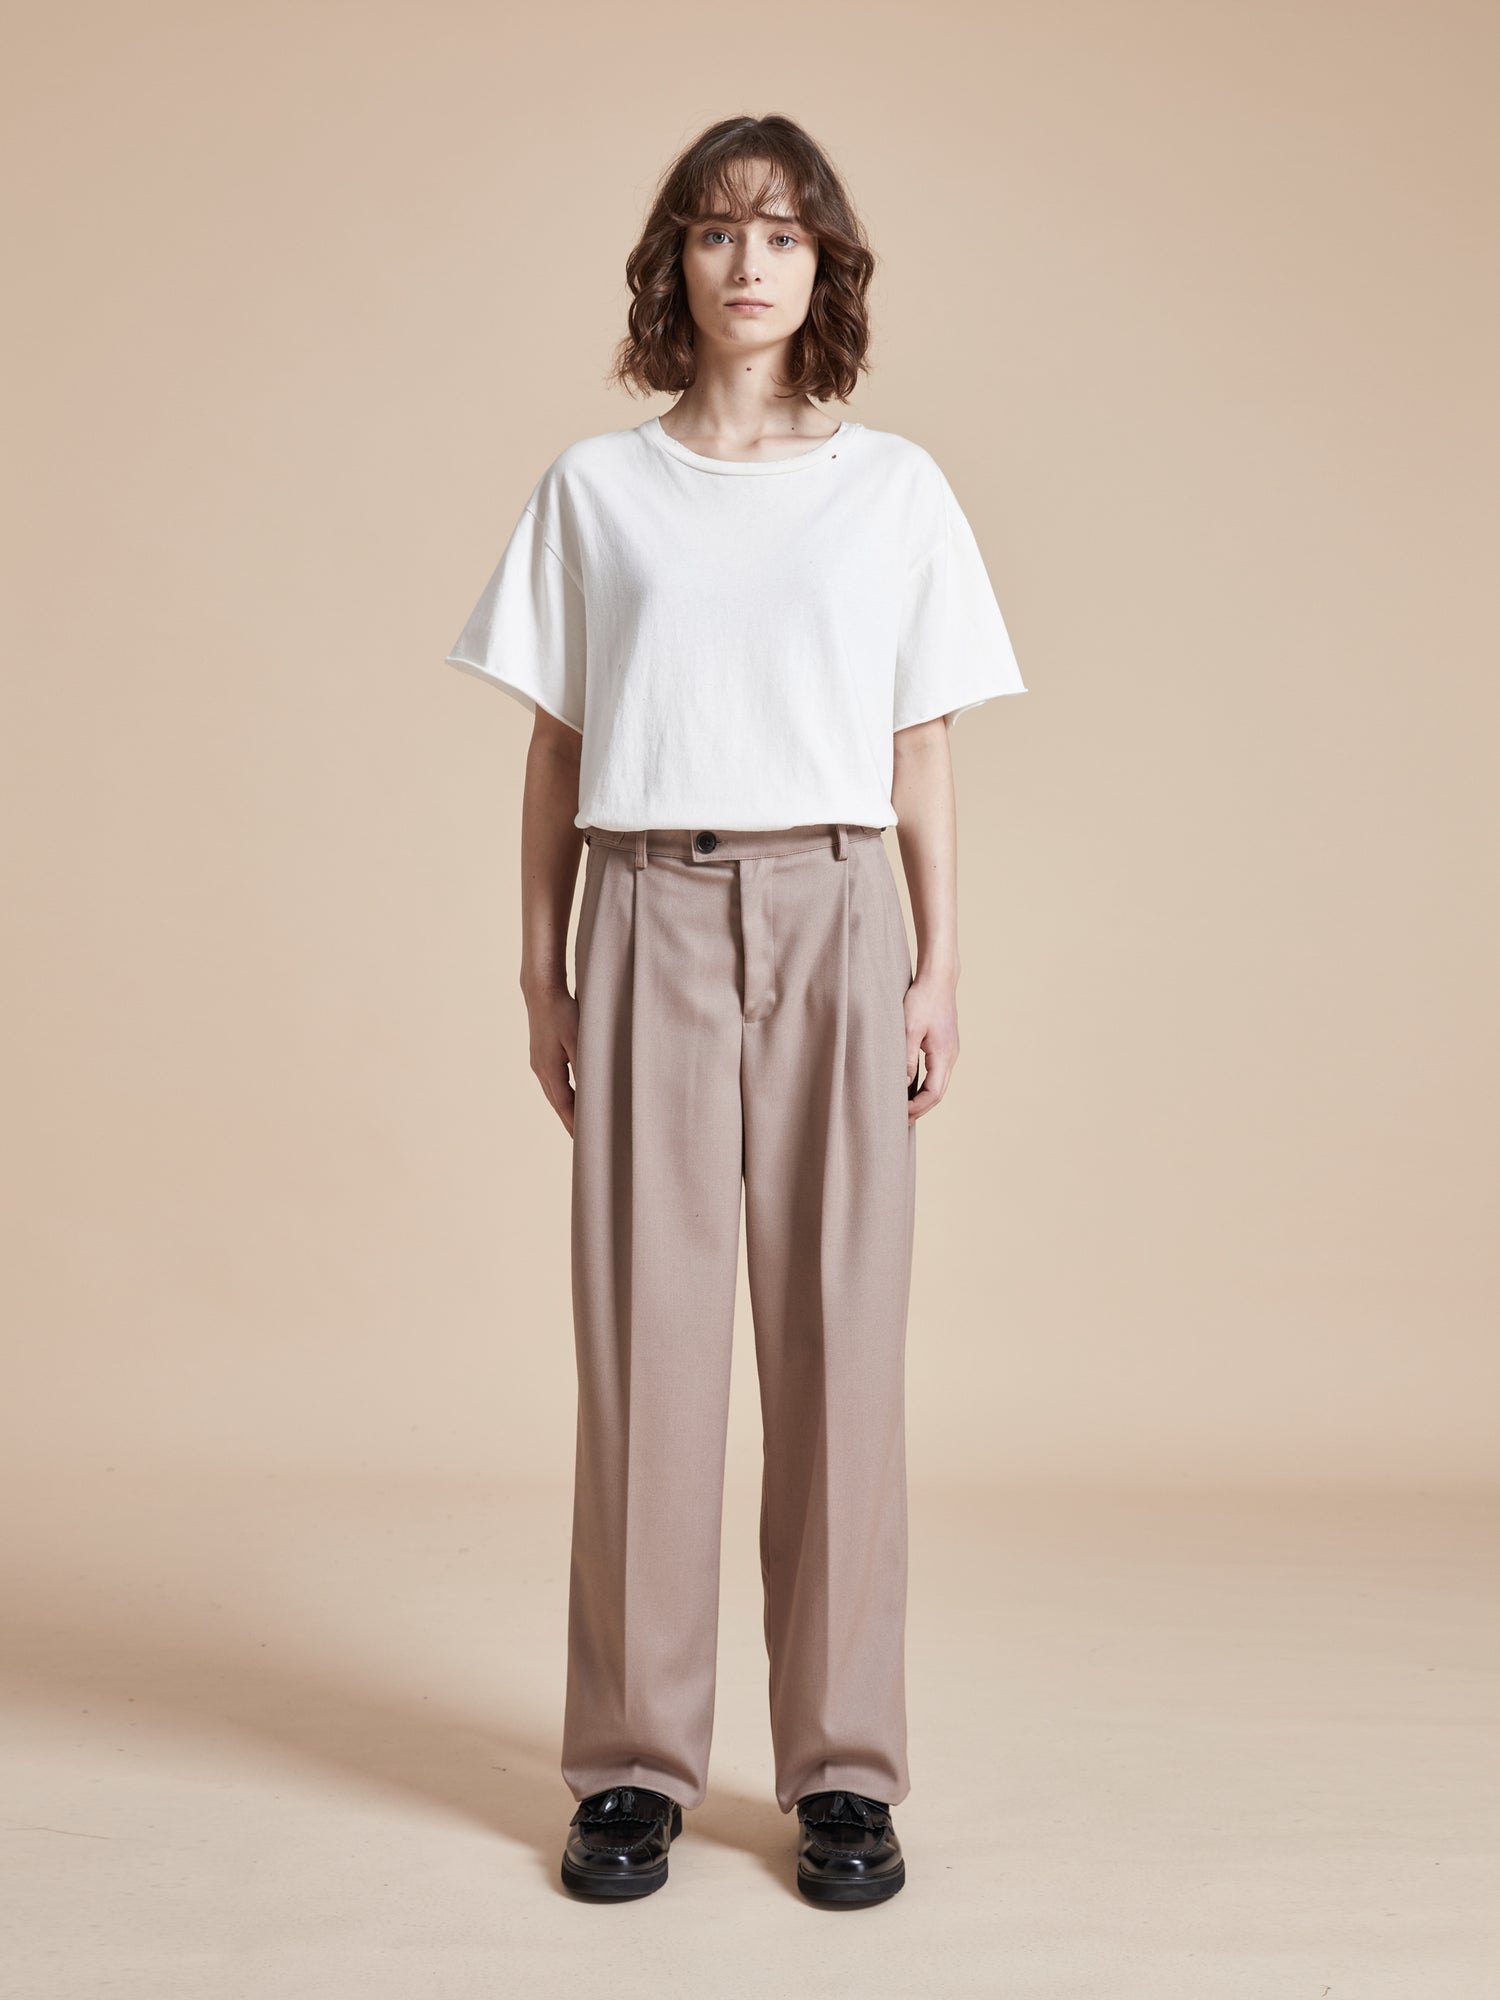 The model is wearing a white t-shirt and beige Found Pleated Trousers.